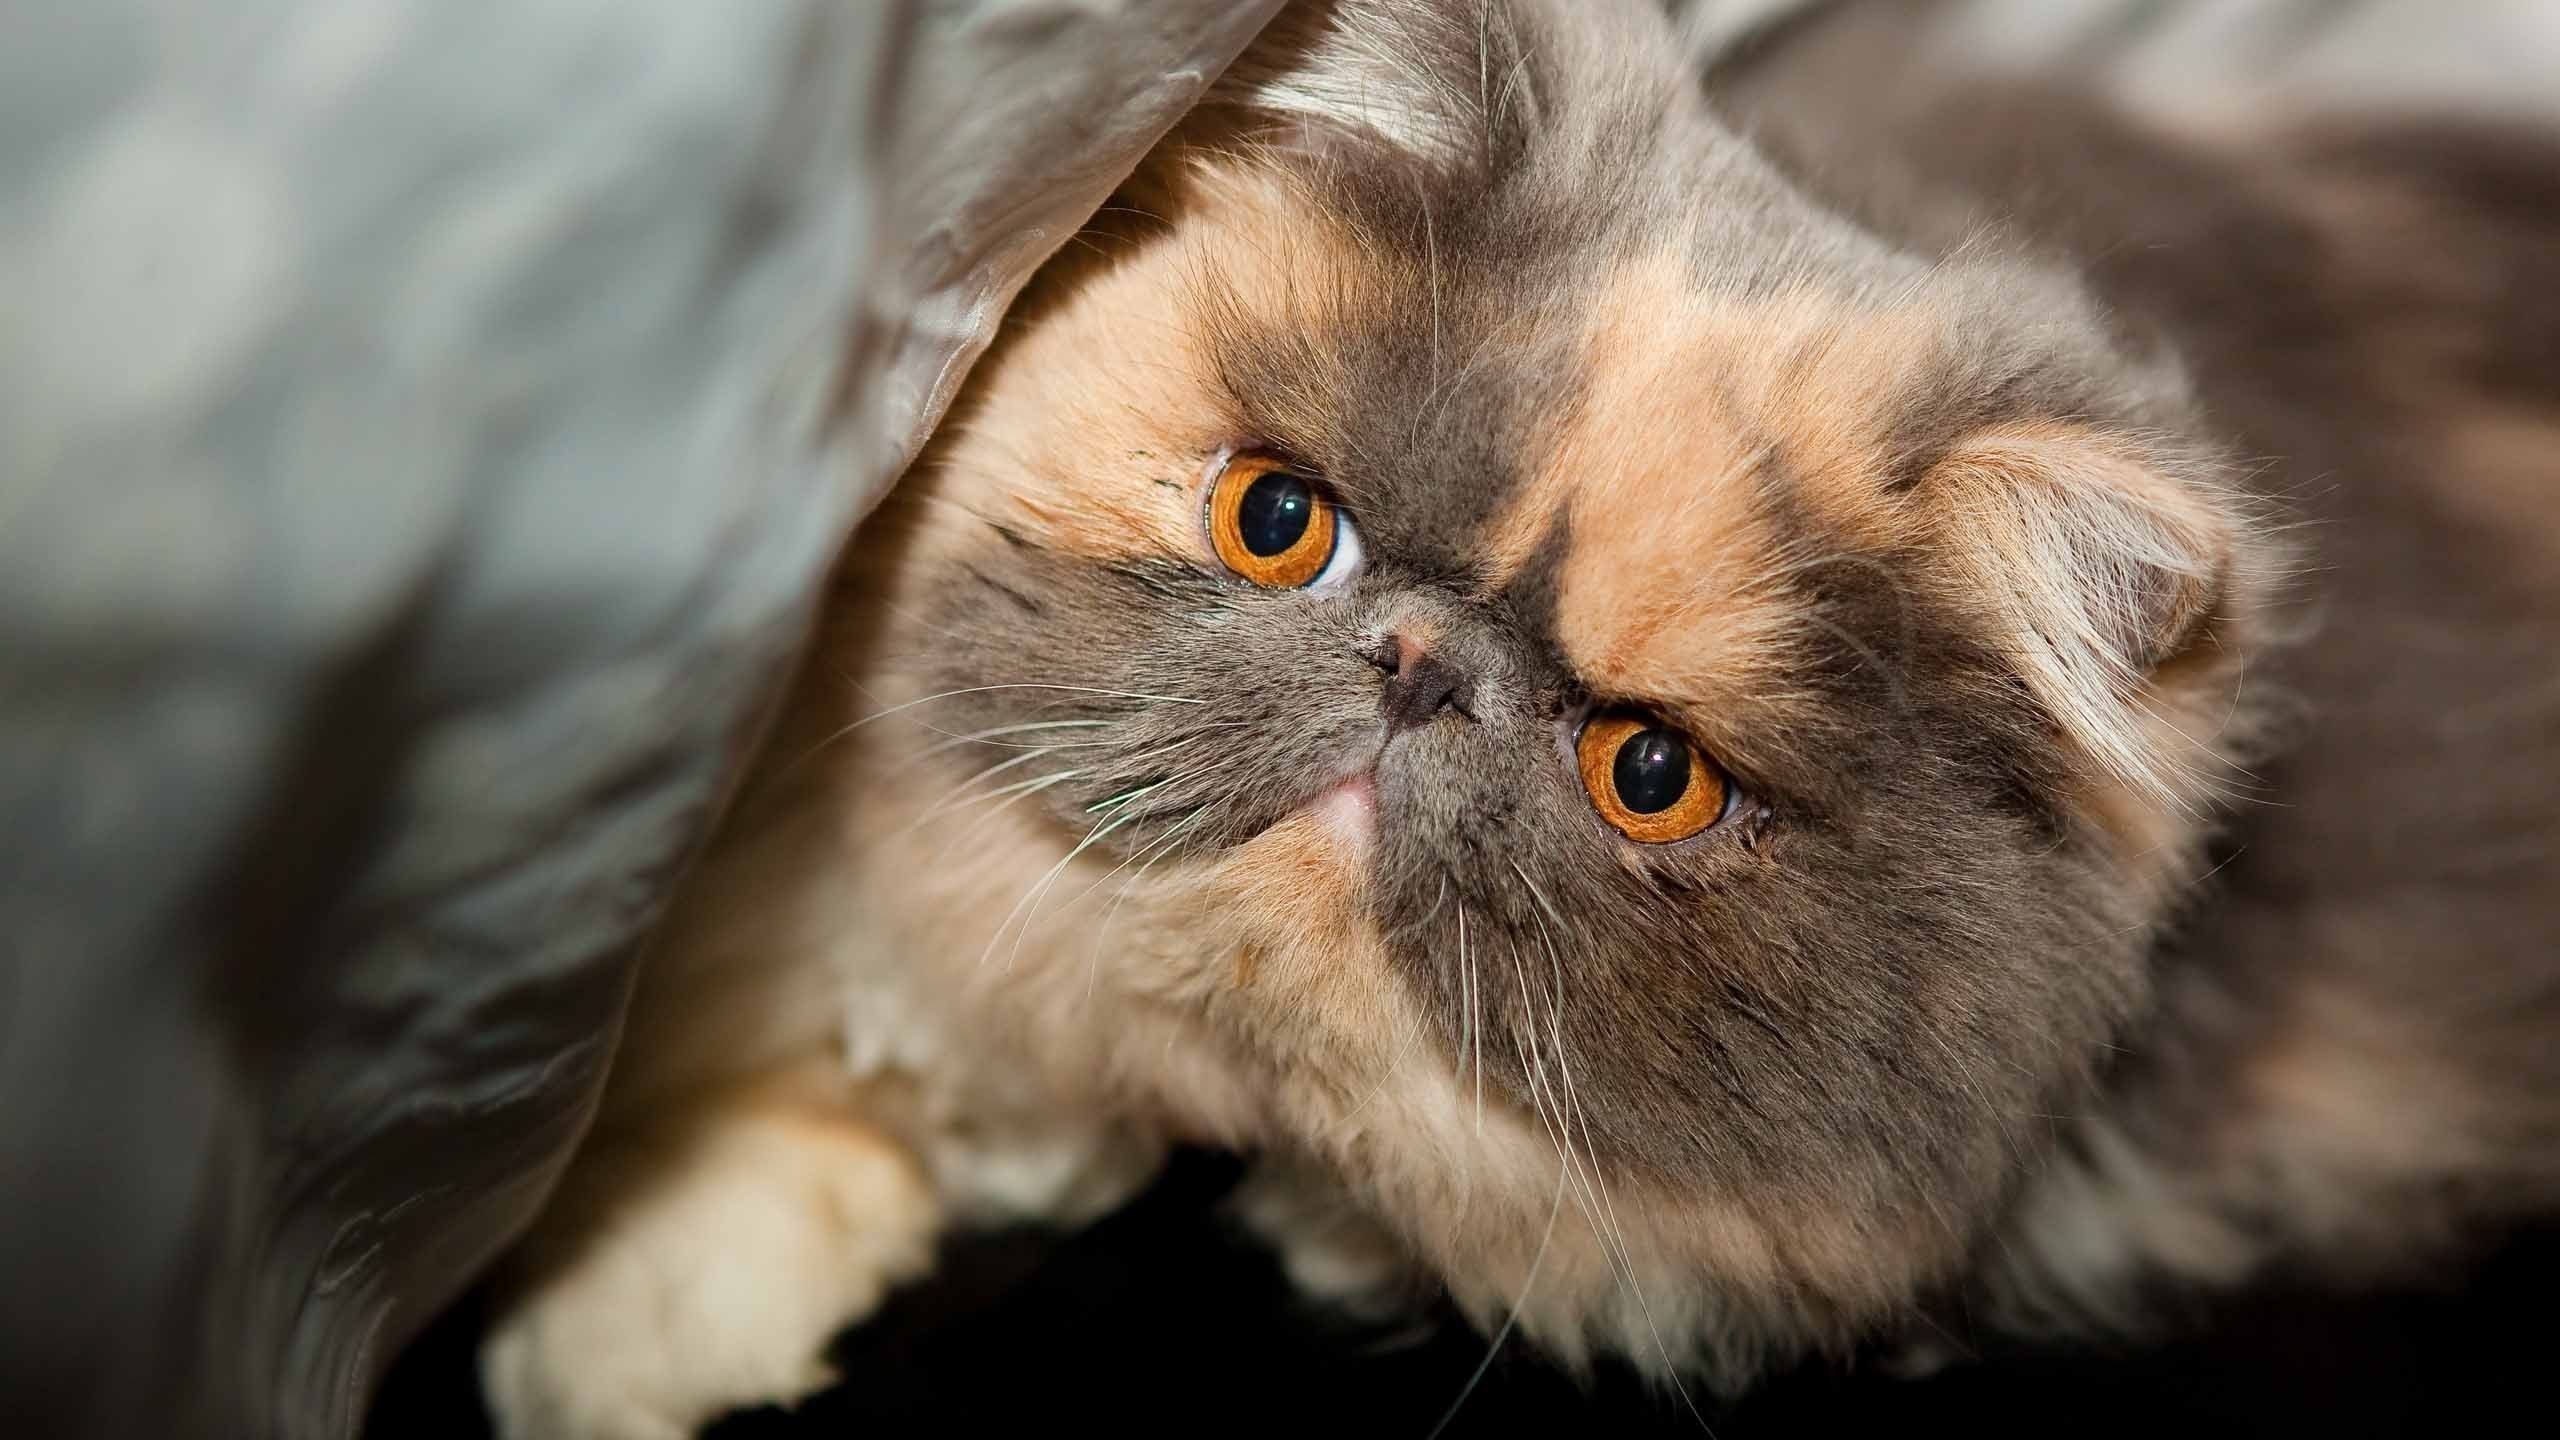 Beautiful Exotic Shorthair for 2560x1440 HDTV resolution